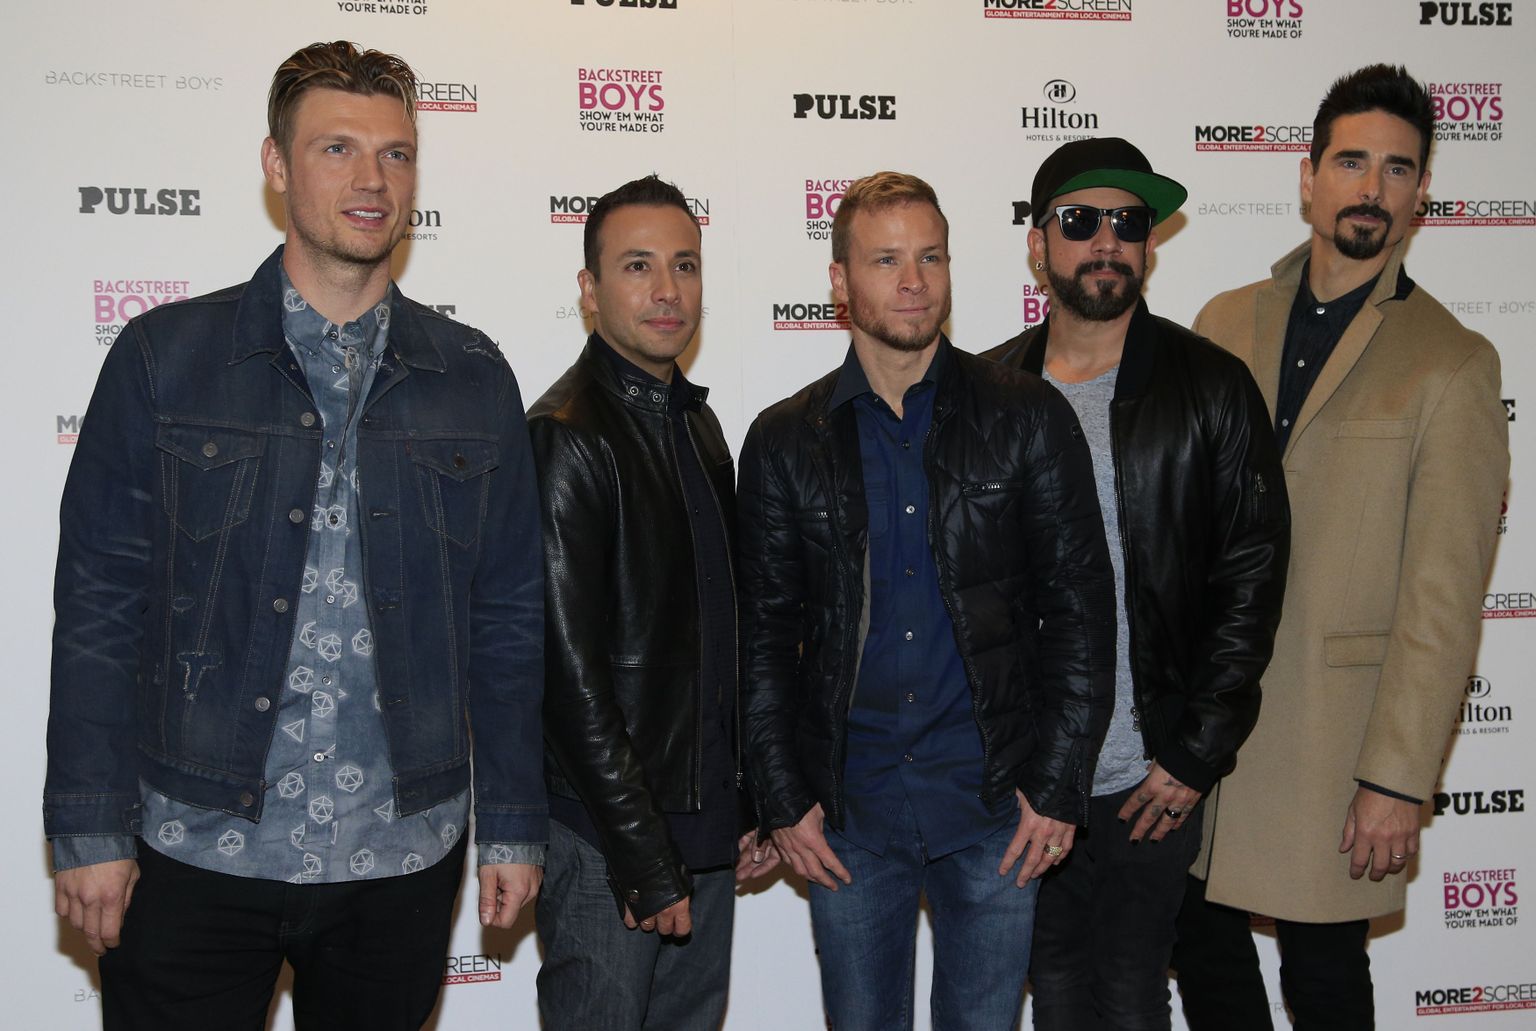 File photo dated 25/02/15 of the Backstreet Boys (left to right) Nick Carter, Howie Dorough, Brian Littrell, AJ McLean, and Kevin Richardson who have released their first new single in five years. The boy band, who recently signed with RCA Records, have launched Don't Go Breaking My Heart shortly after celebrating their 25th anniversary.